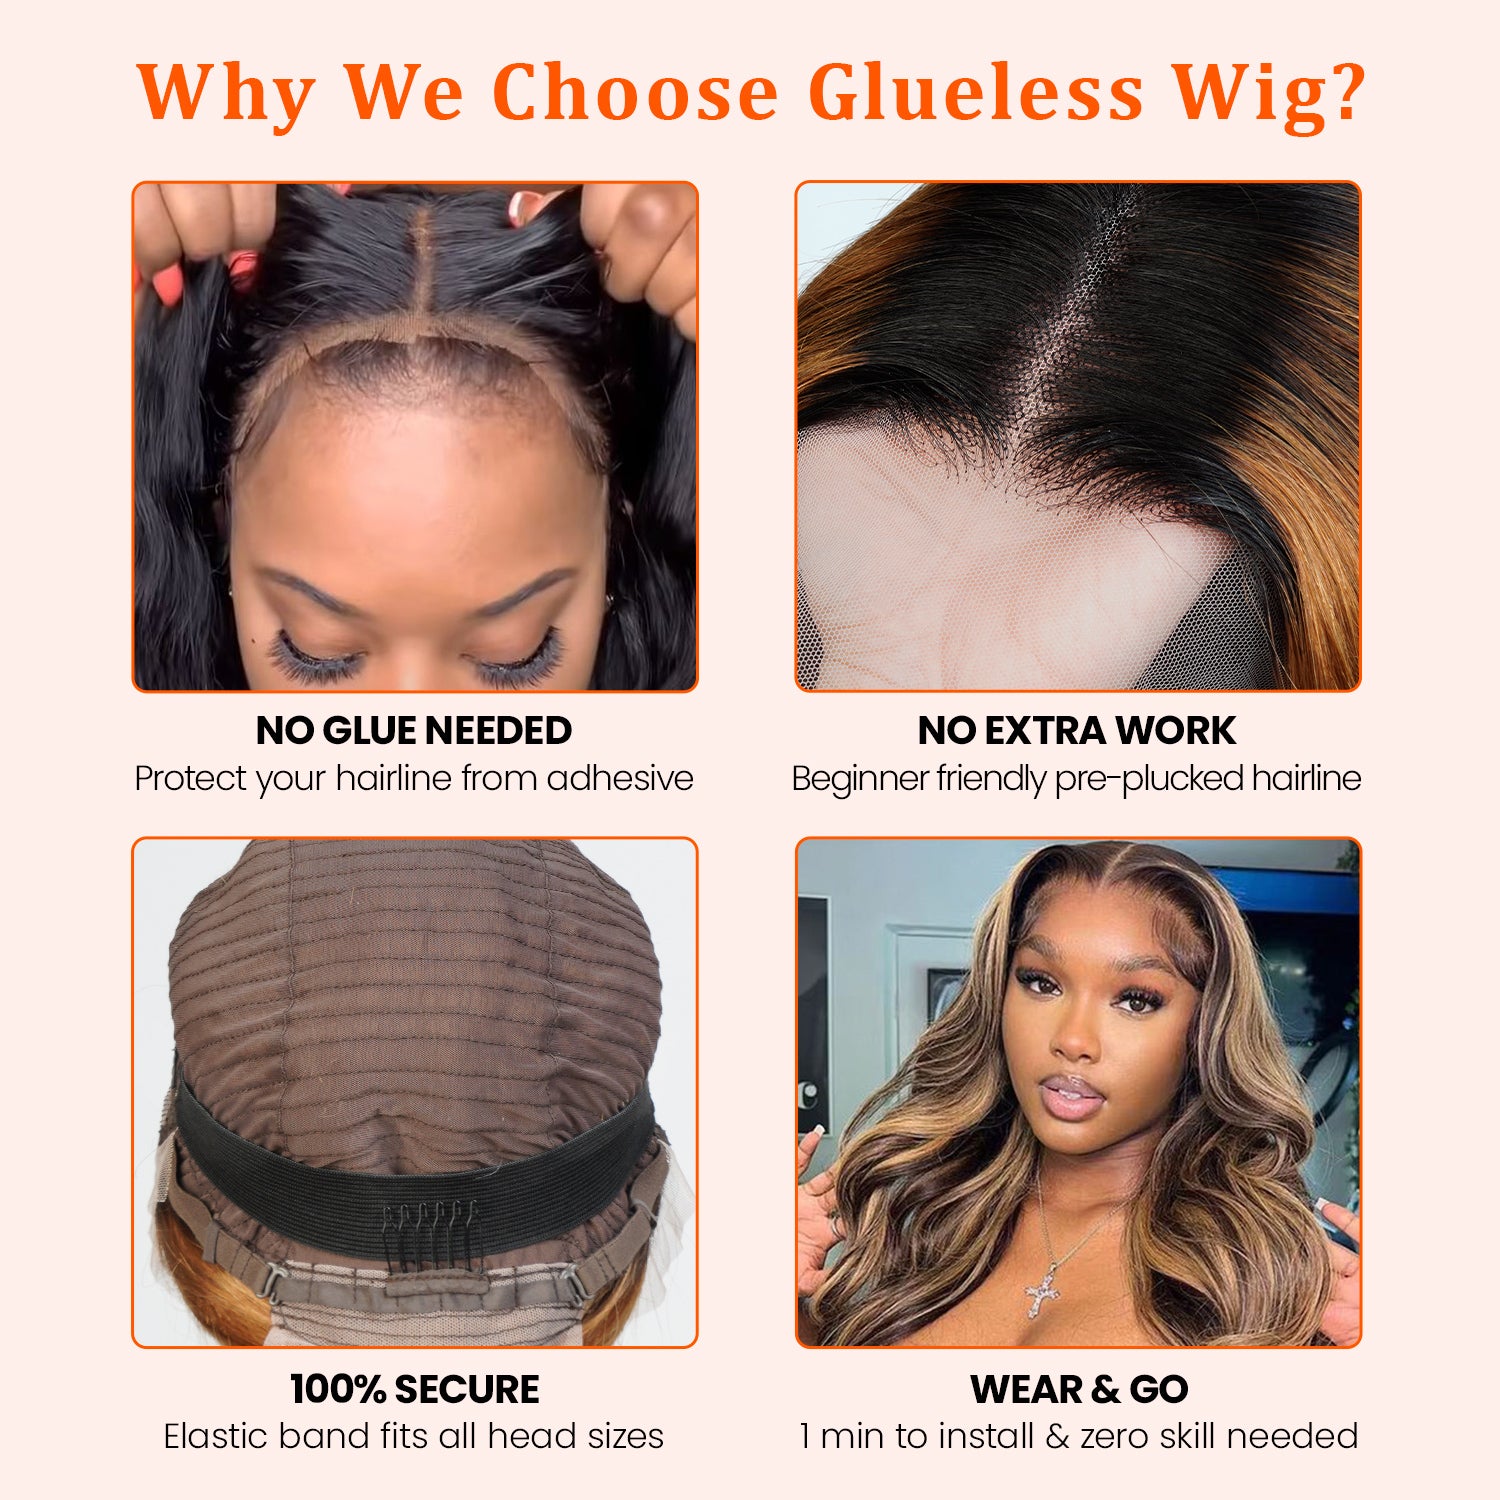 UpScale 100% Human Hair Glueless 13x4 Lace Frontal Wig Honey Blonde Highlight Body Wave 20"